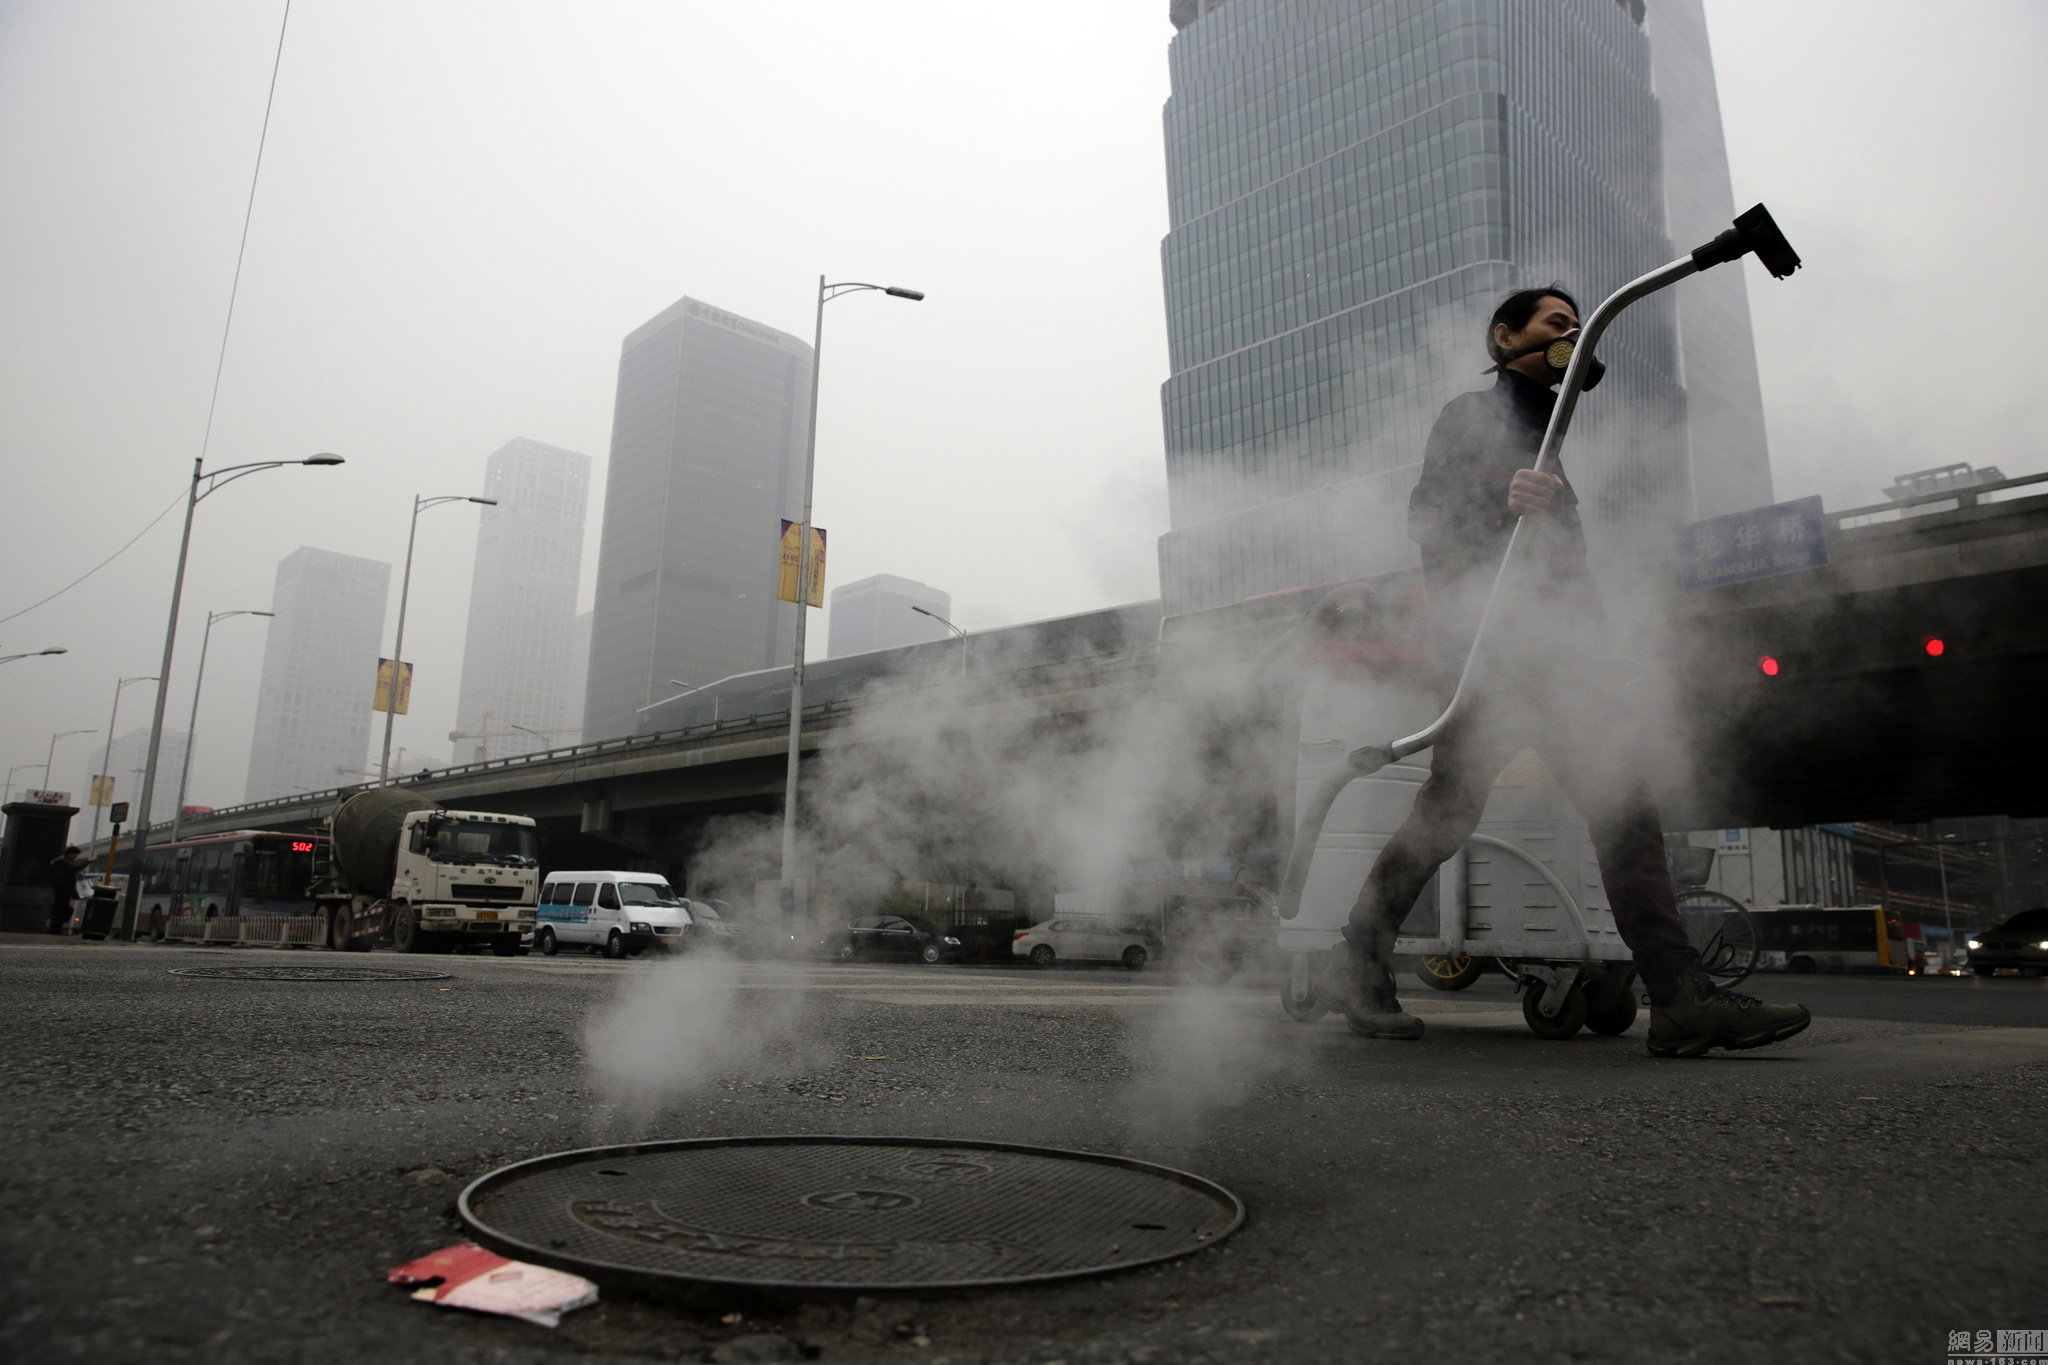 100-Day Performance Art Piece: Dust Vacuumed From Beijing Air at CBD area